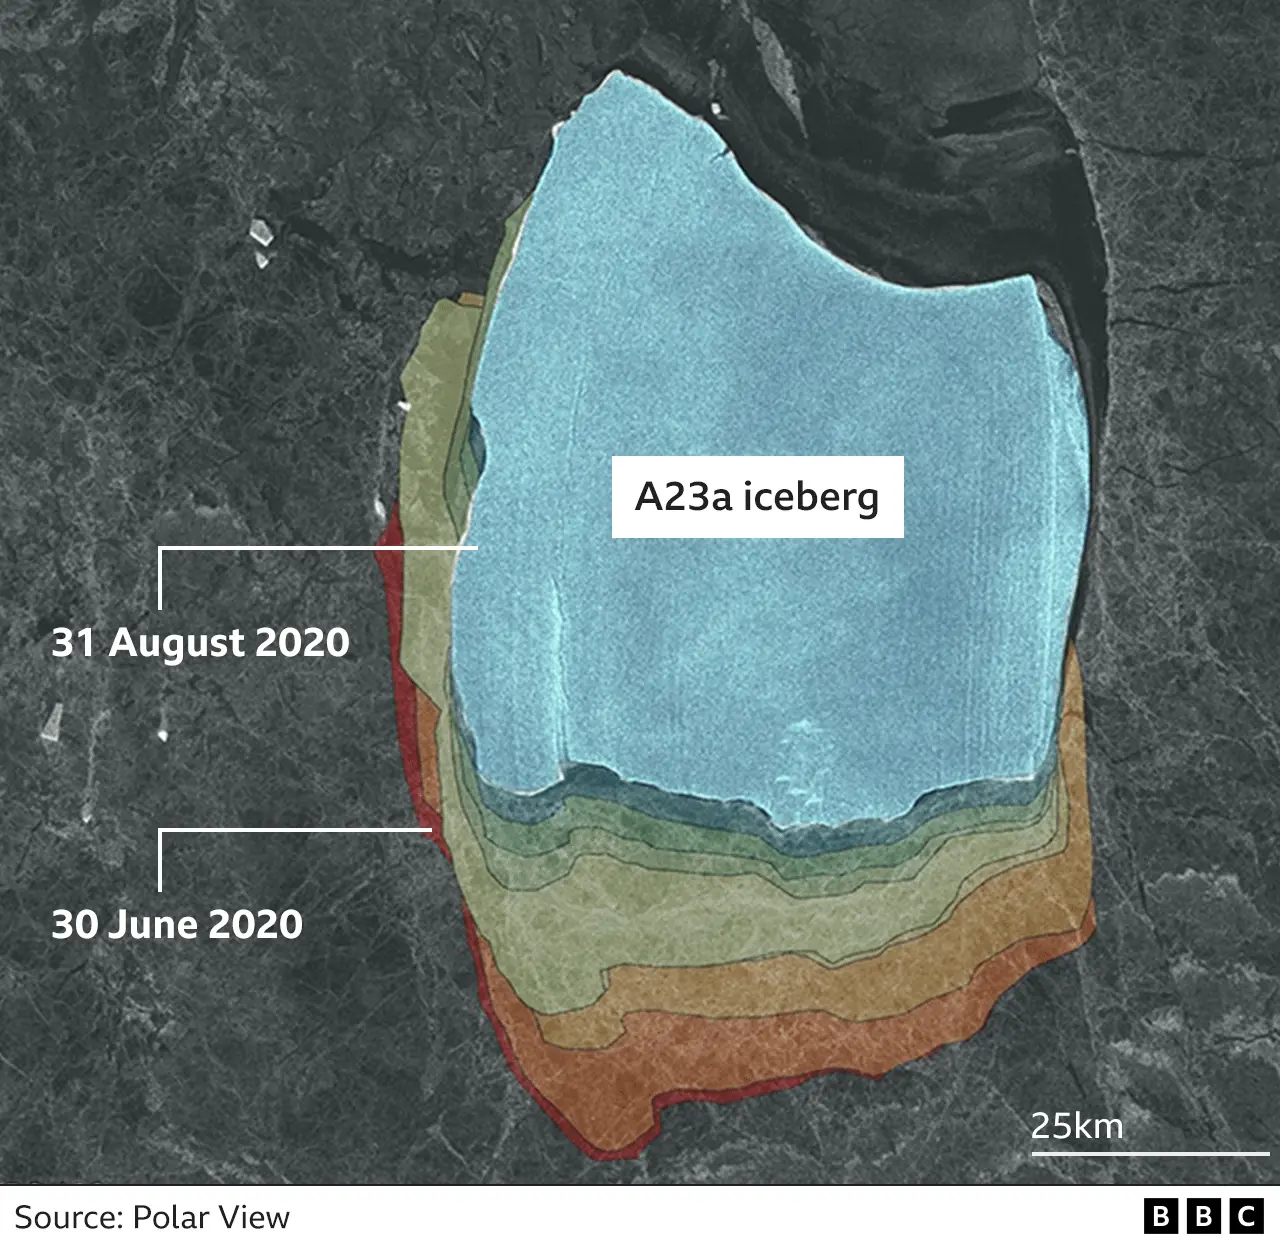 A23a: World's biggest iceberg on the move after 30 years